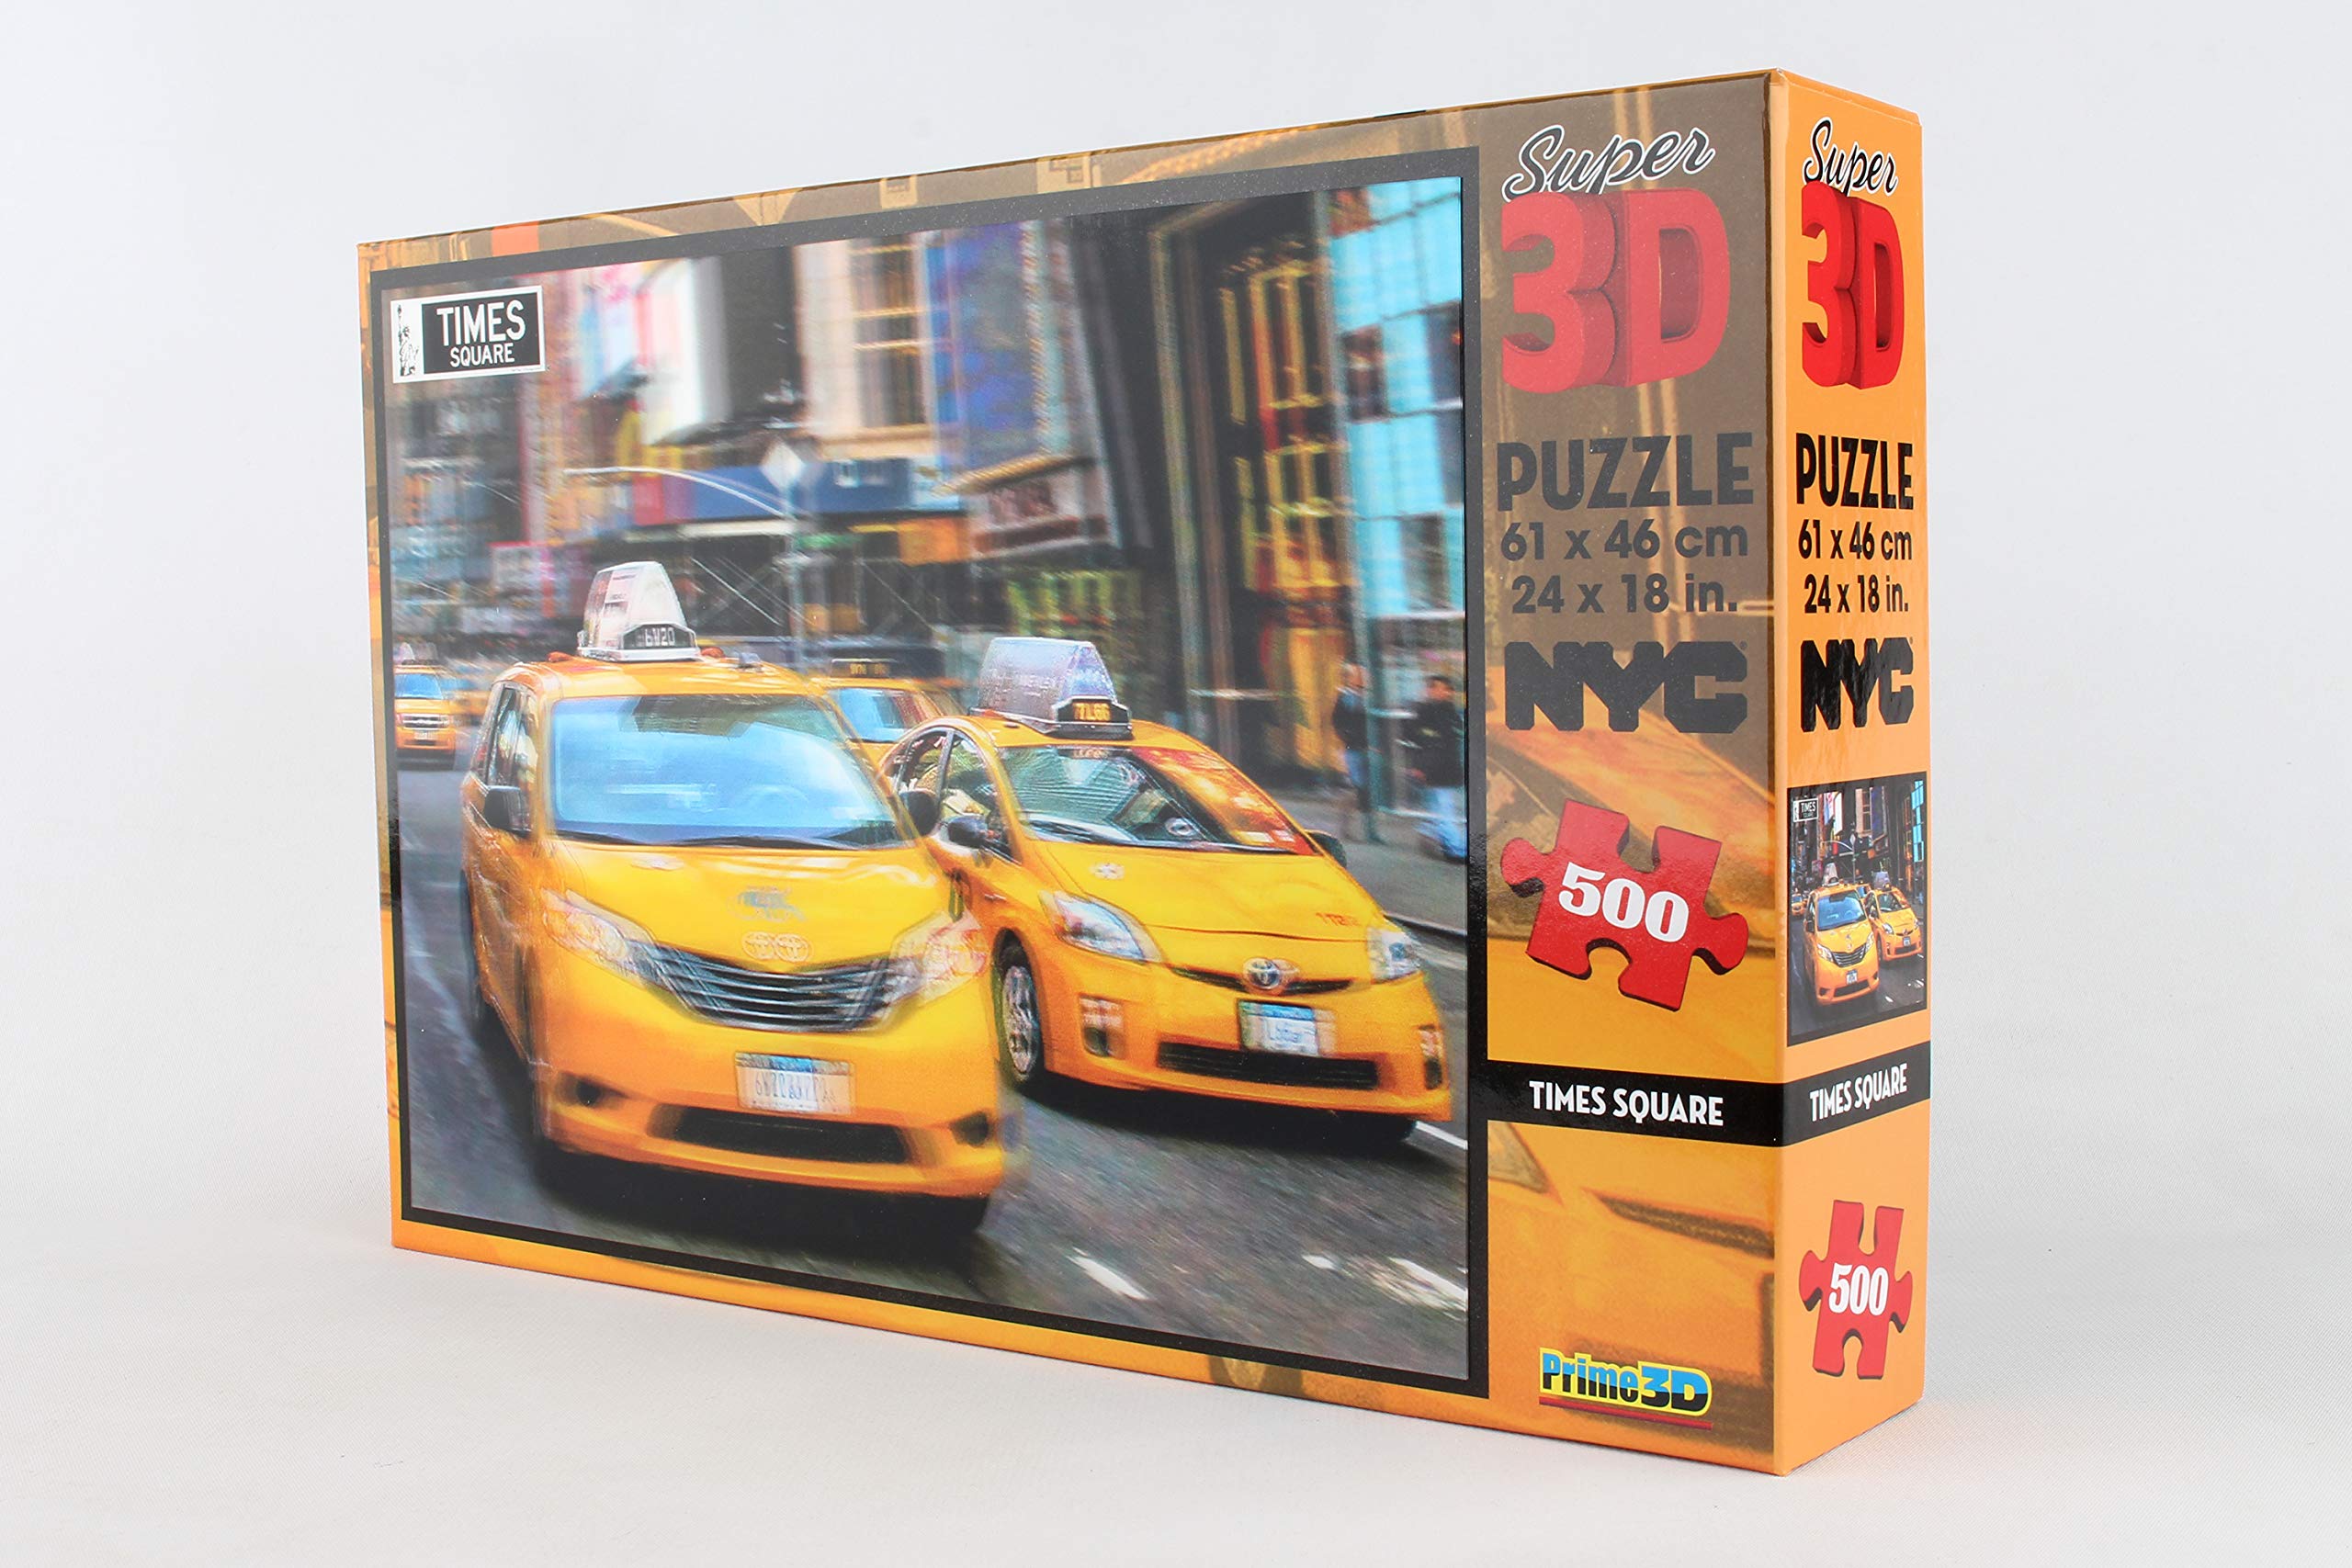 New York City Times Square NYC Taxi Prime Super 3D PUZZLE - 500 PIECES PD10